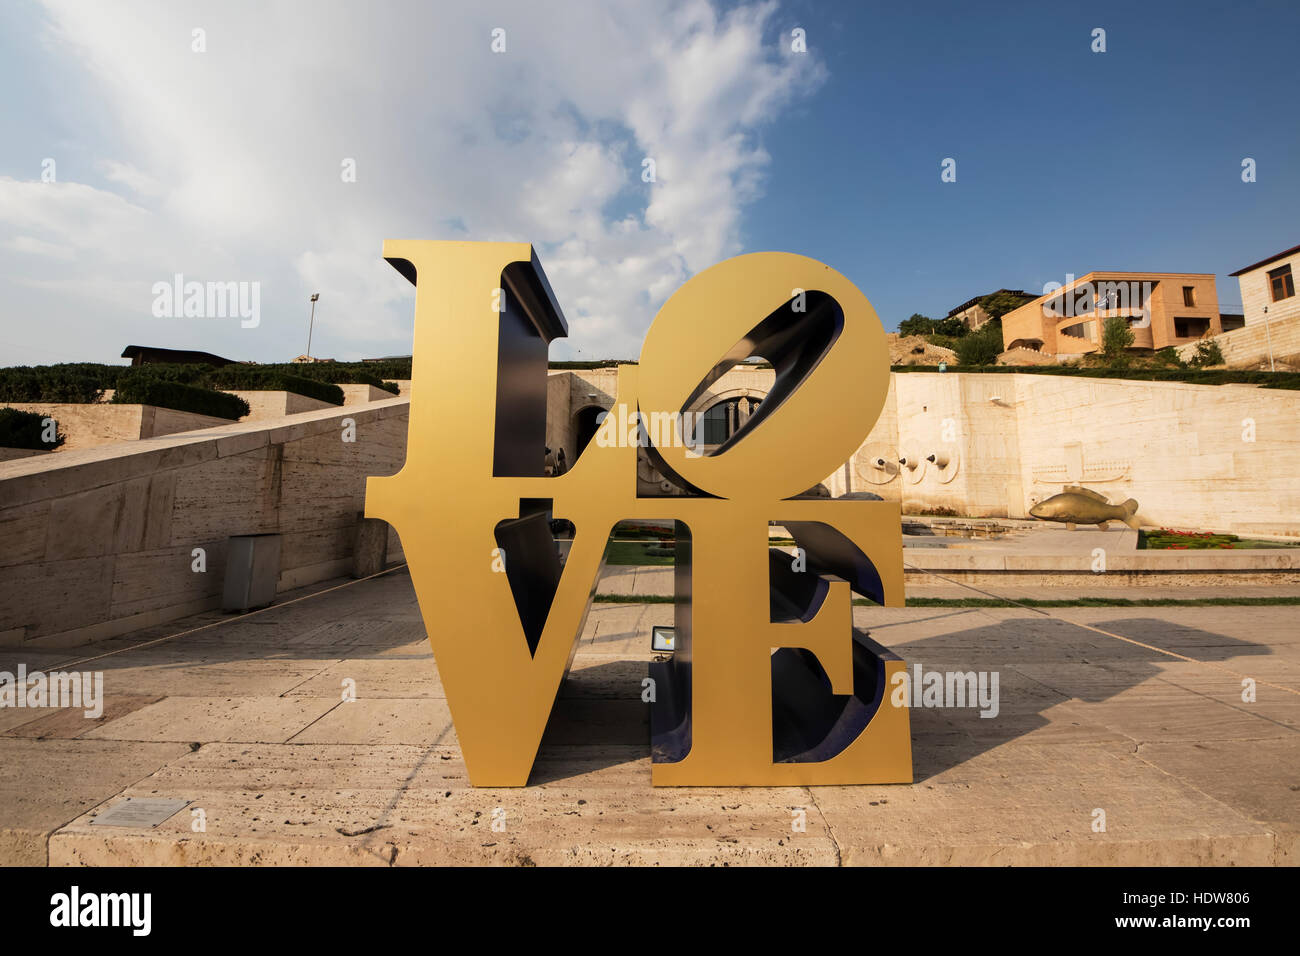 LOVE, iconic pop art image by American artist Robert Indiana on display at the Cafesjian Museum of Art in the Yerevan Cascade; Yerevan, Armenia Stock Photo